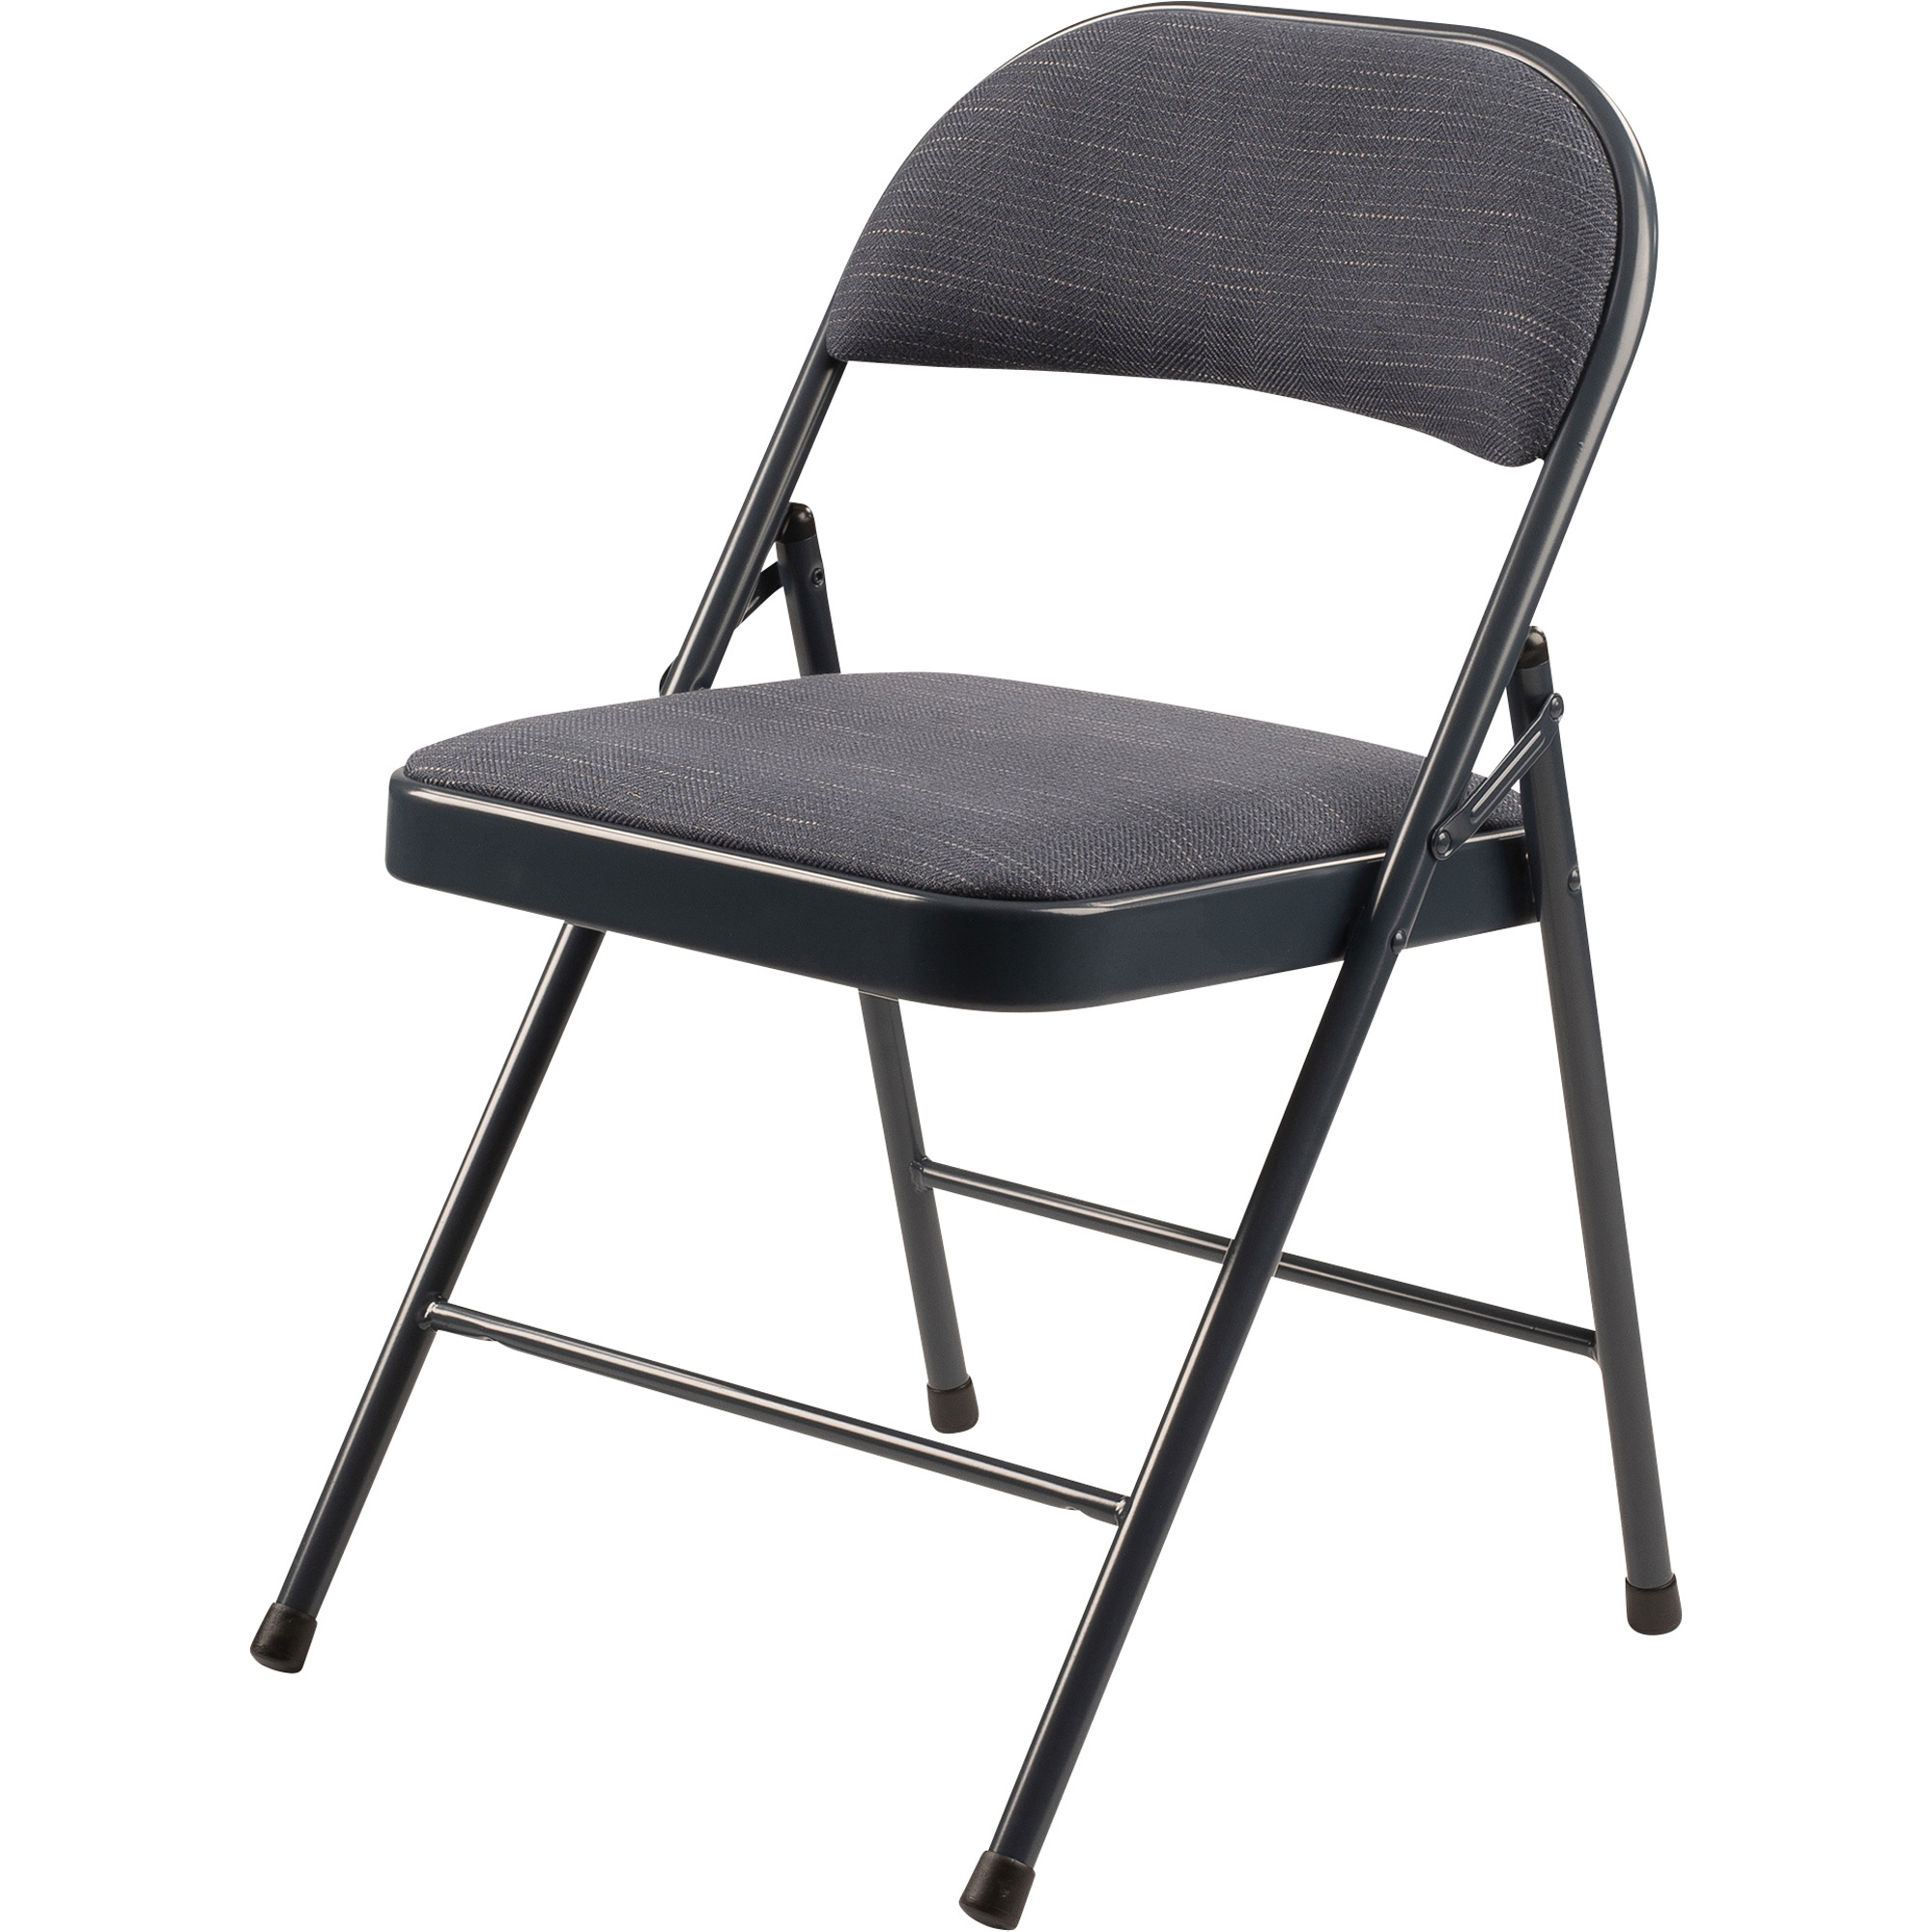 Fabric Padded Folding Chairs — 4-Pack, Blue, Model - National Public Seating 974